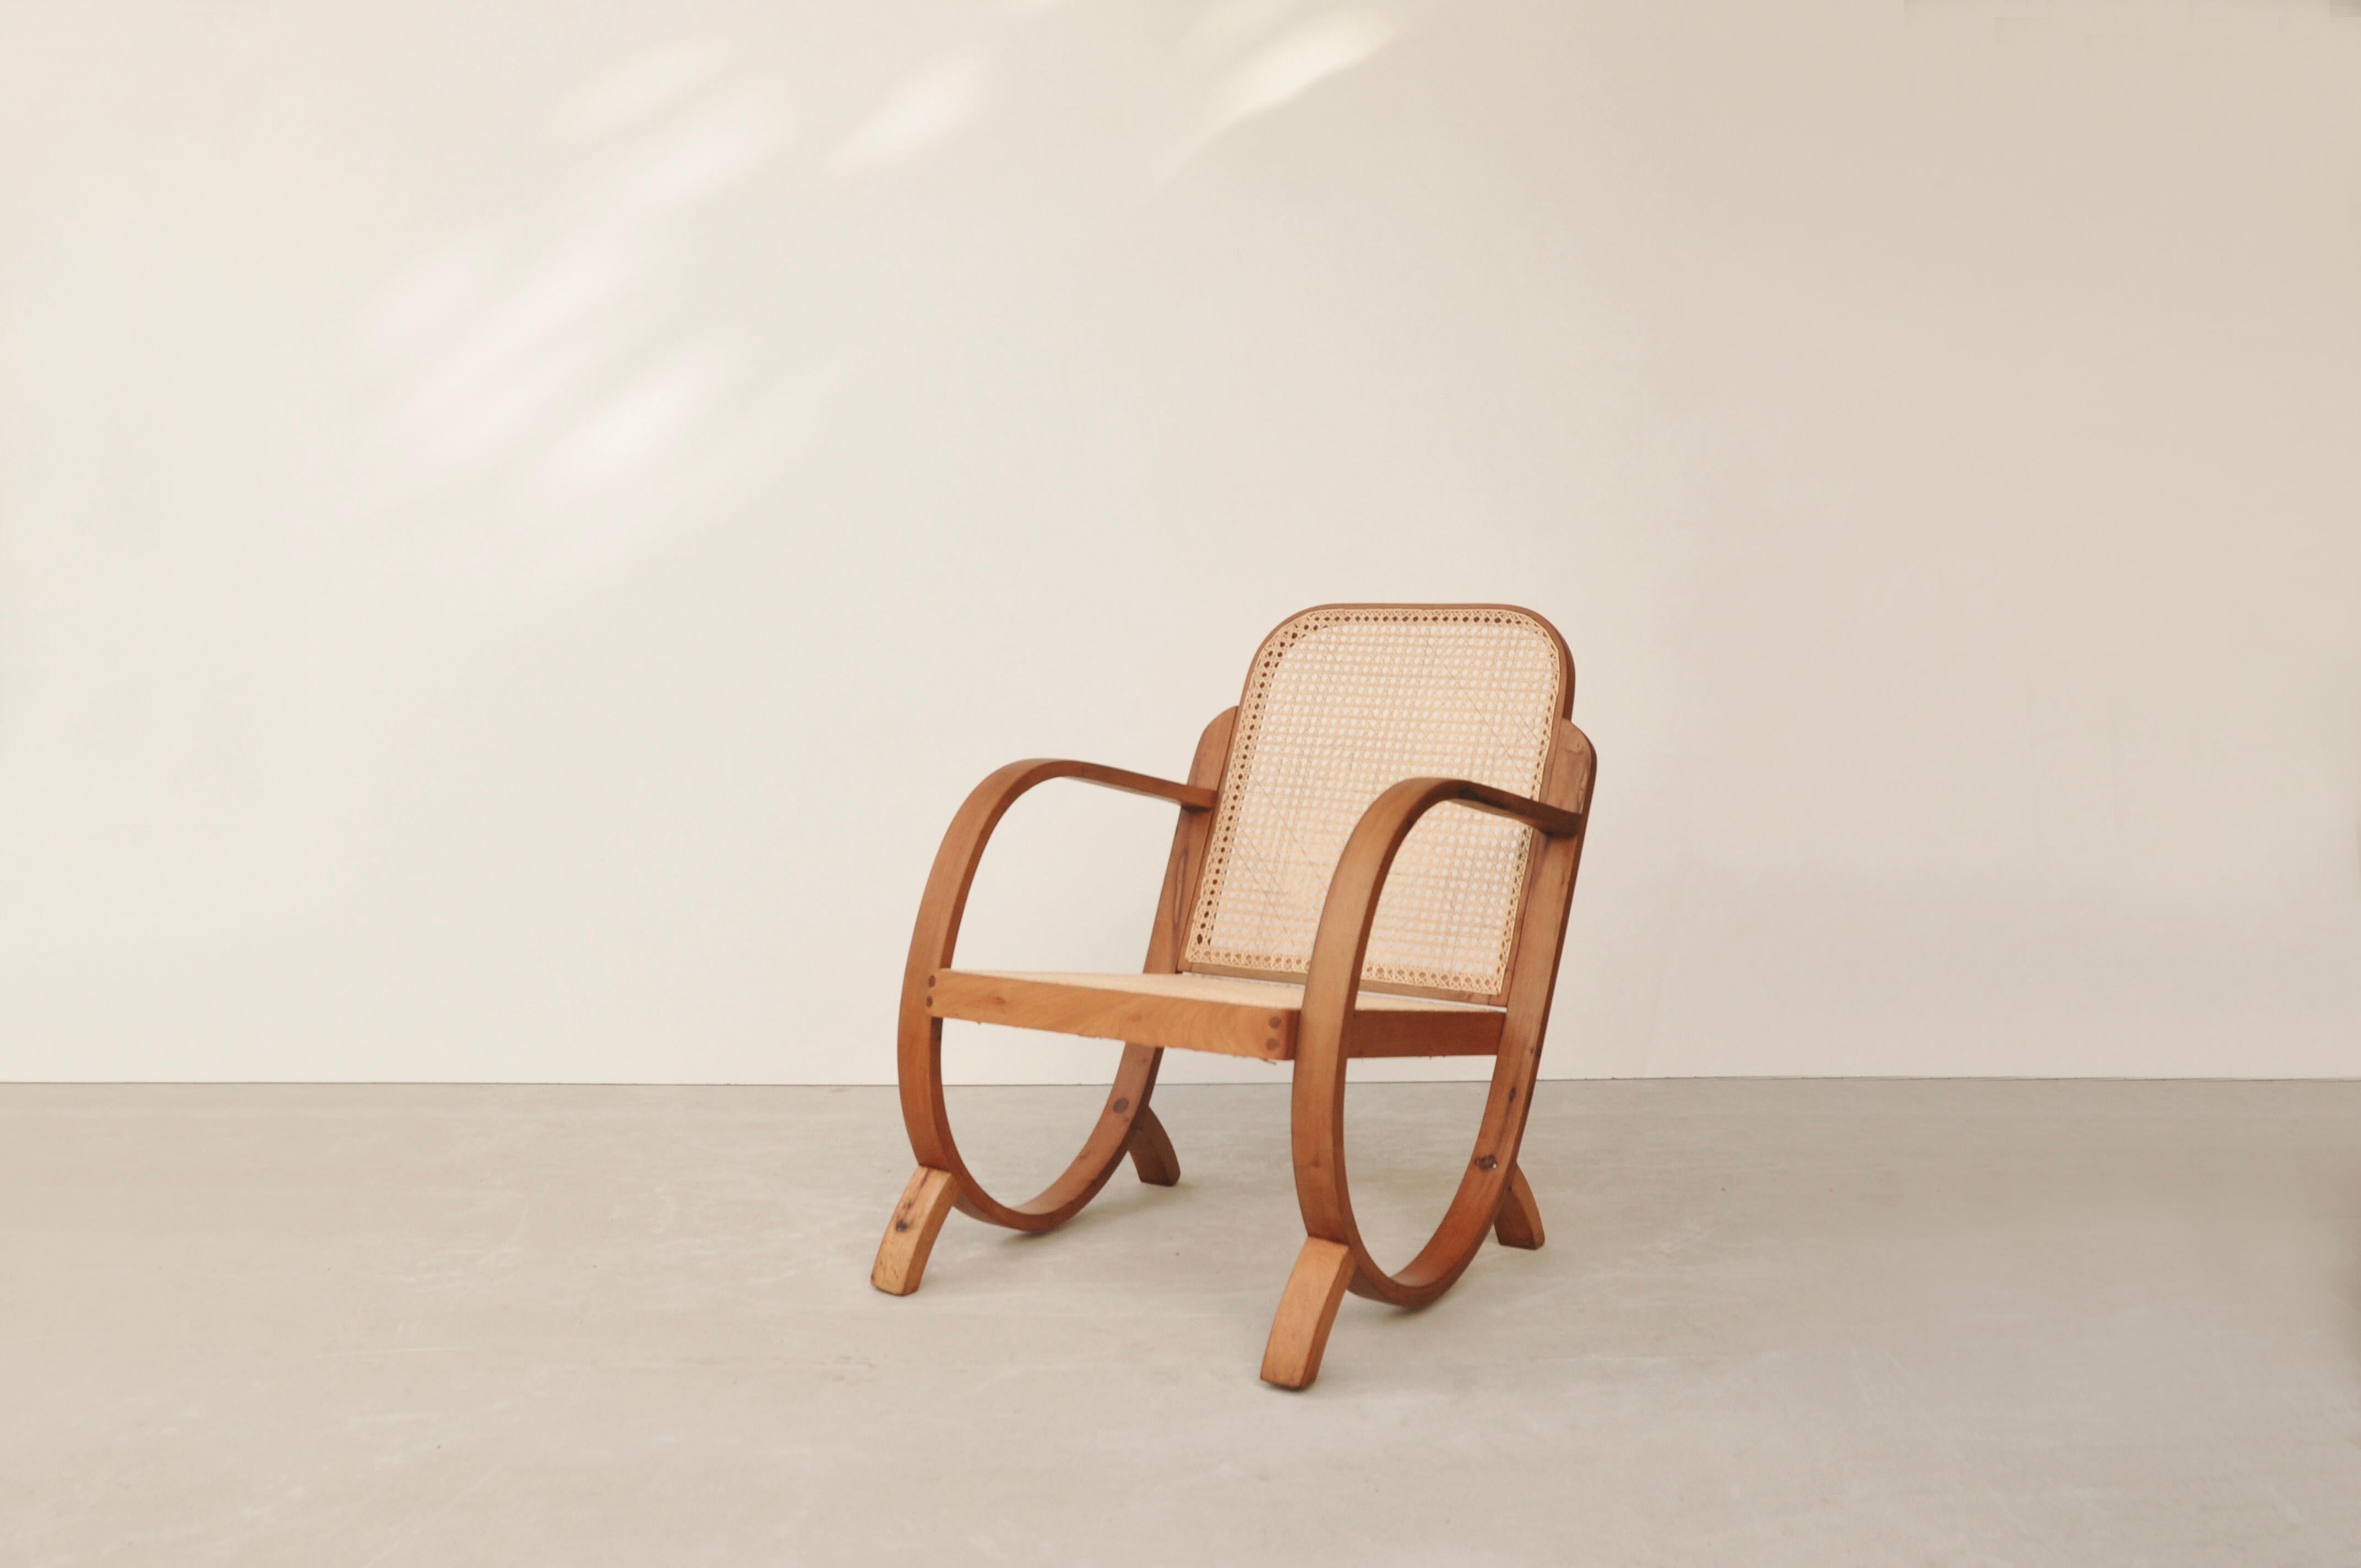 Armchair with structure in bent solid wood and seat and backrest in natural cane designed and produced by Móveis Gerdau in the 1960s in Brazil. It has been completely restored with new wood finish and new natural plaited cane. Móveis Gerdau was a